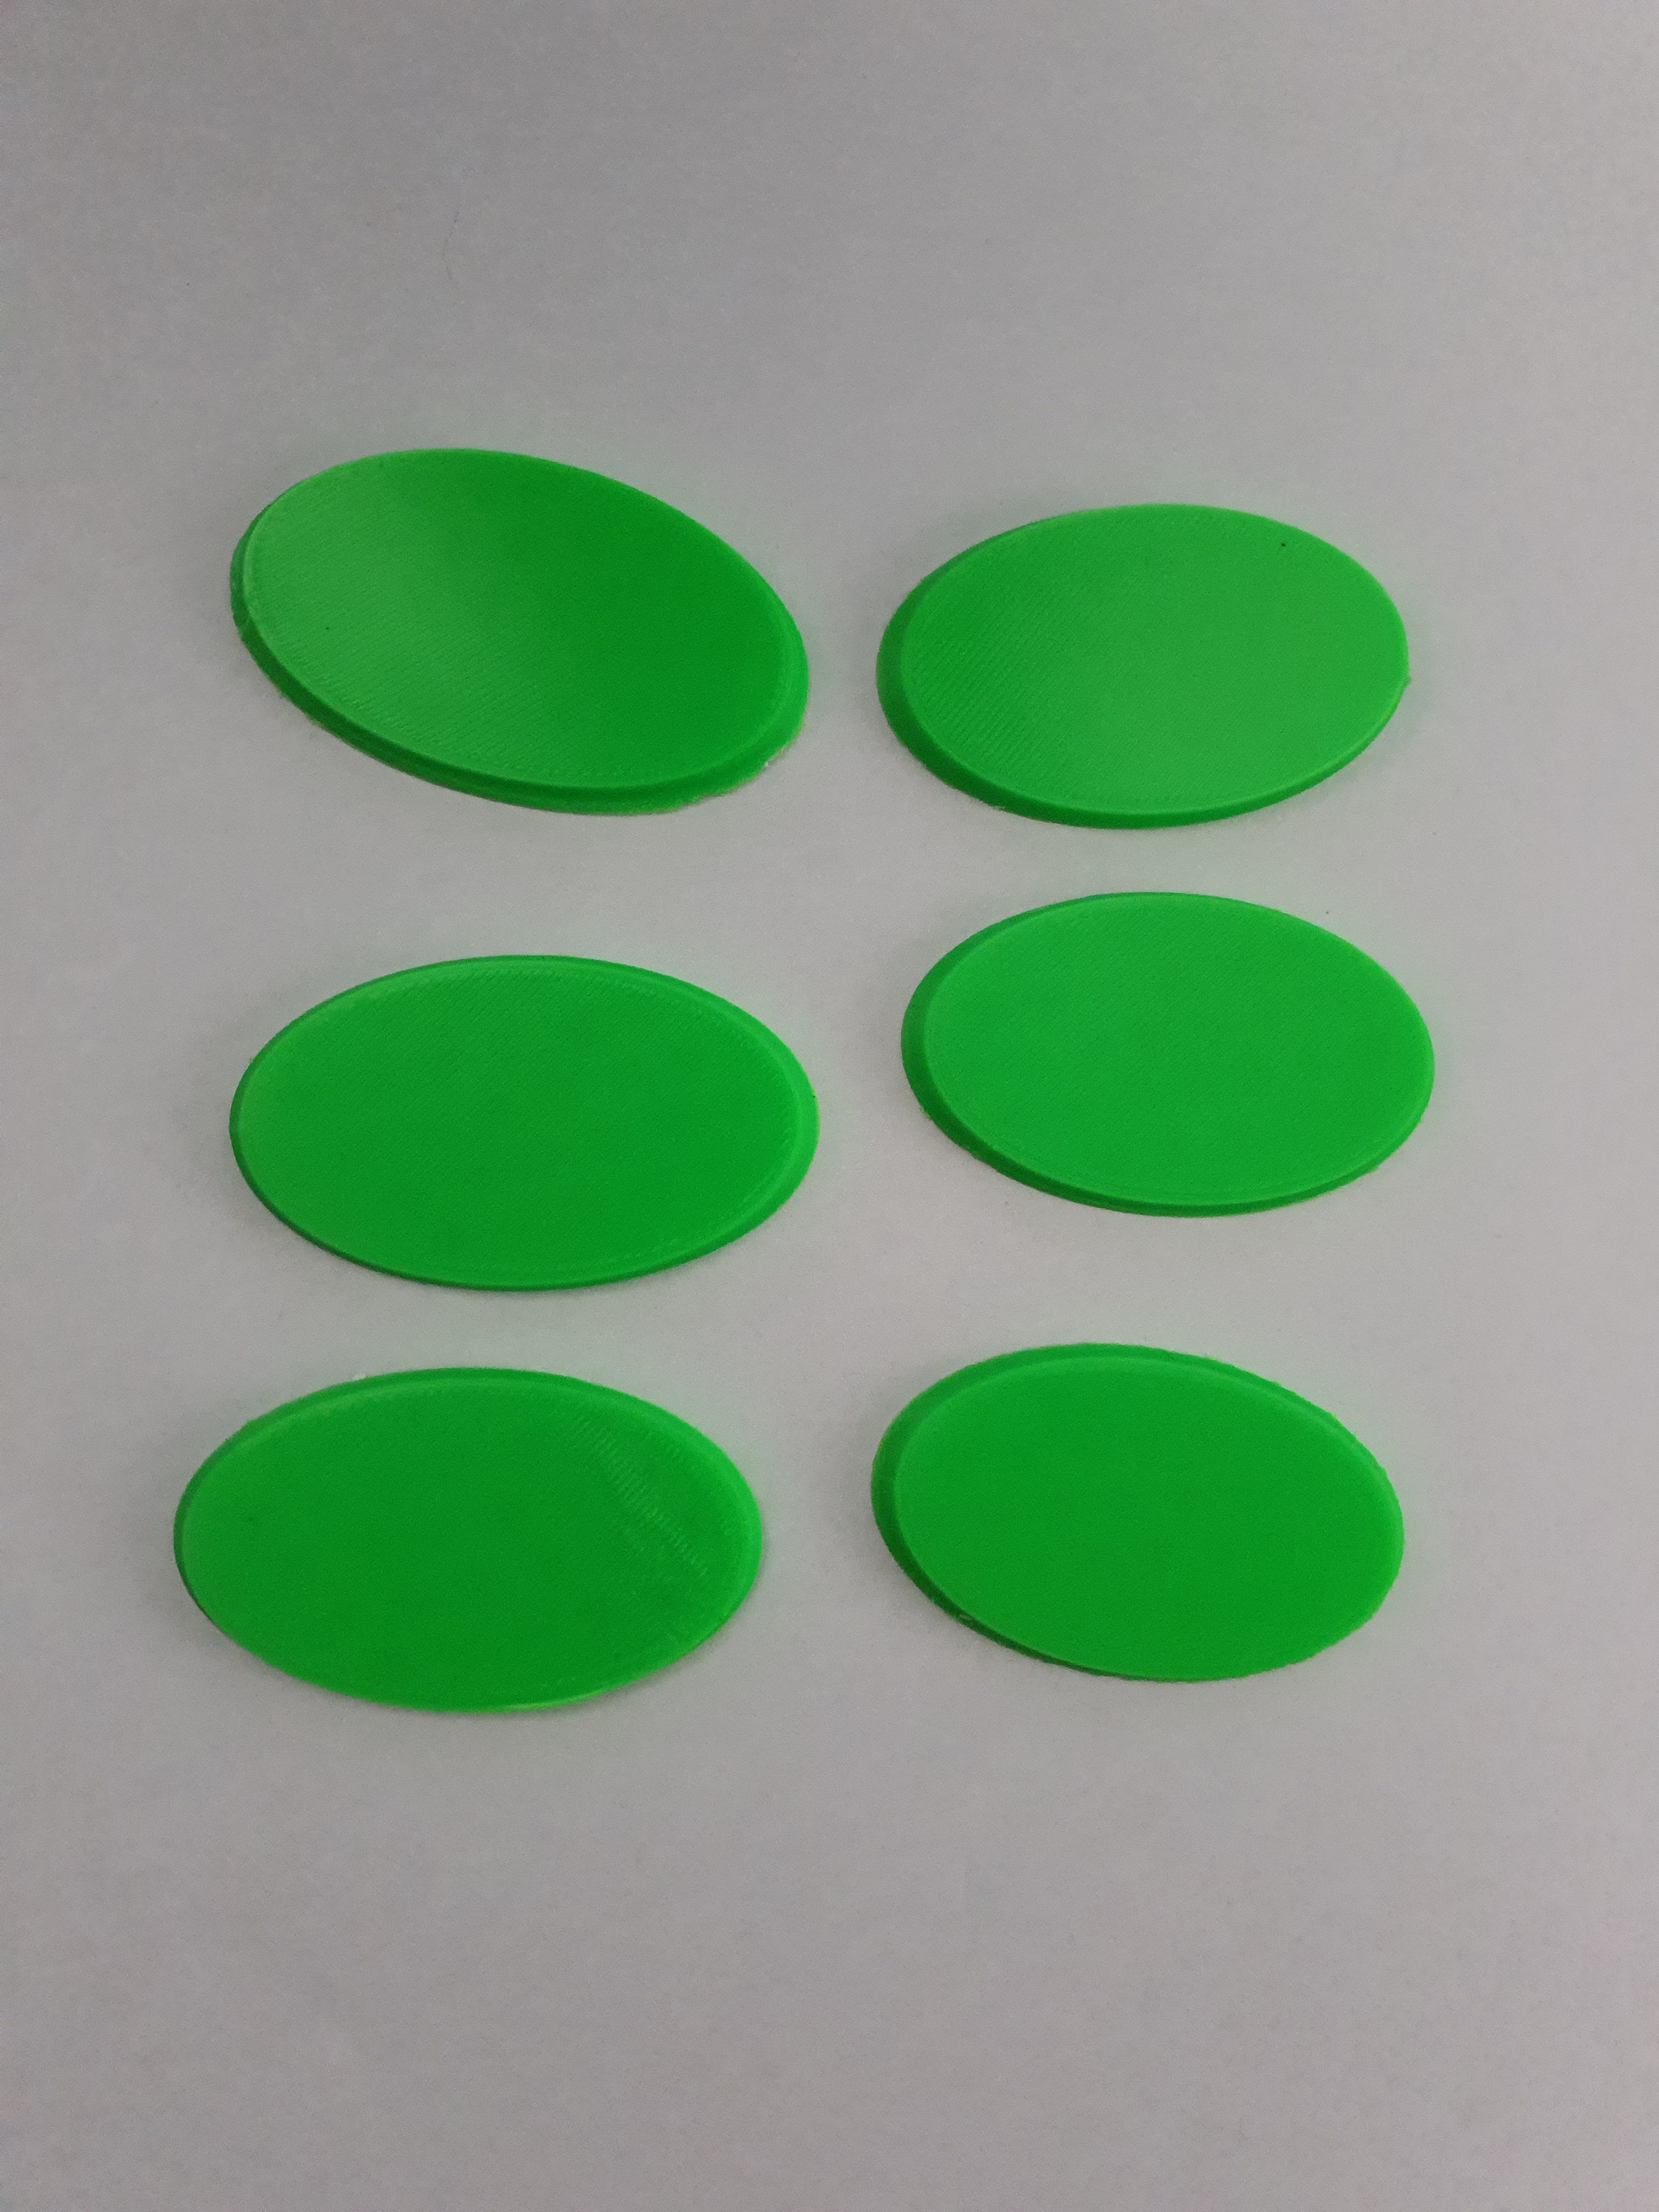 A Pack of 6x 60mm x 35mm Oval Bases | Cracking-Singles